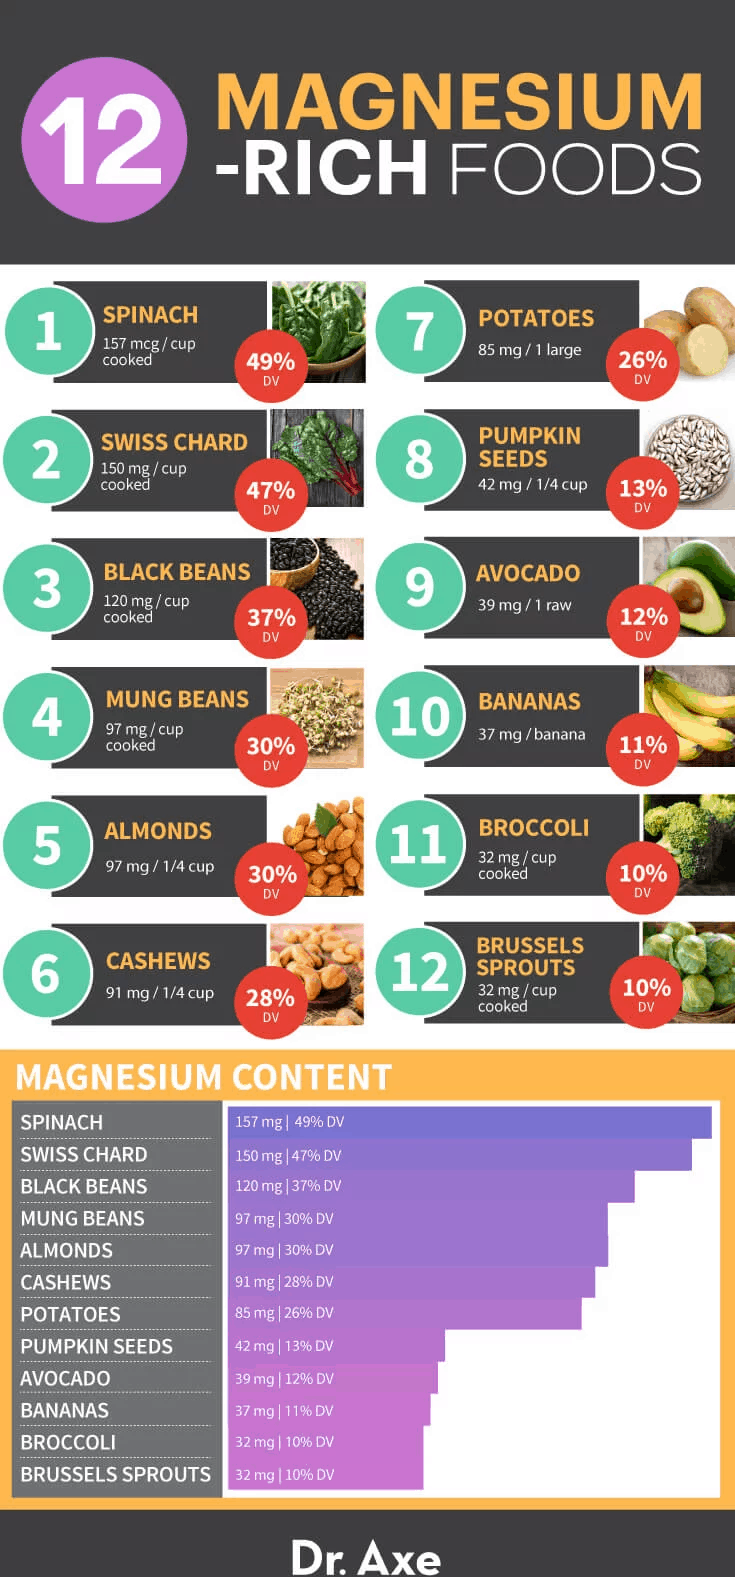 Magnesium supplements - Dr. Axe